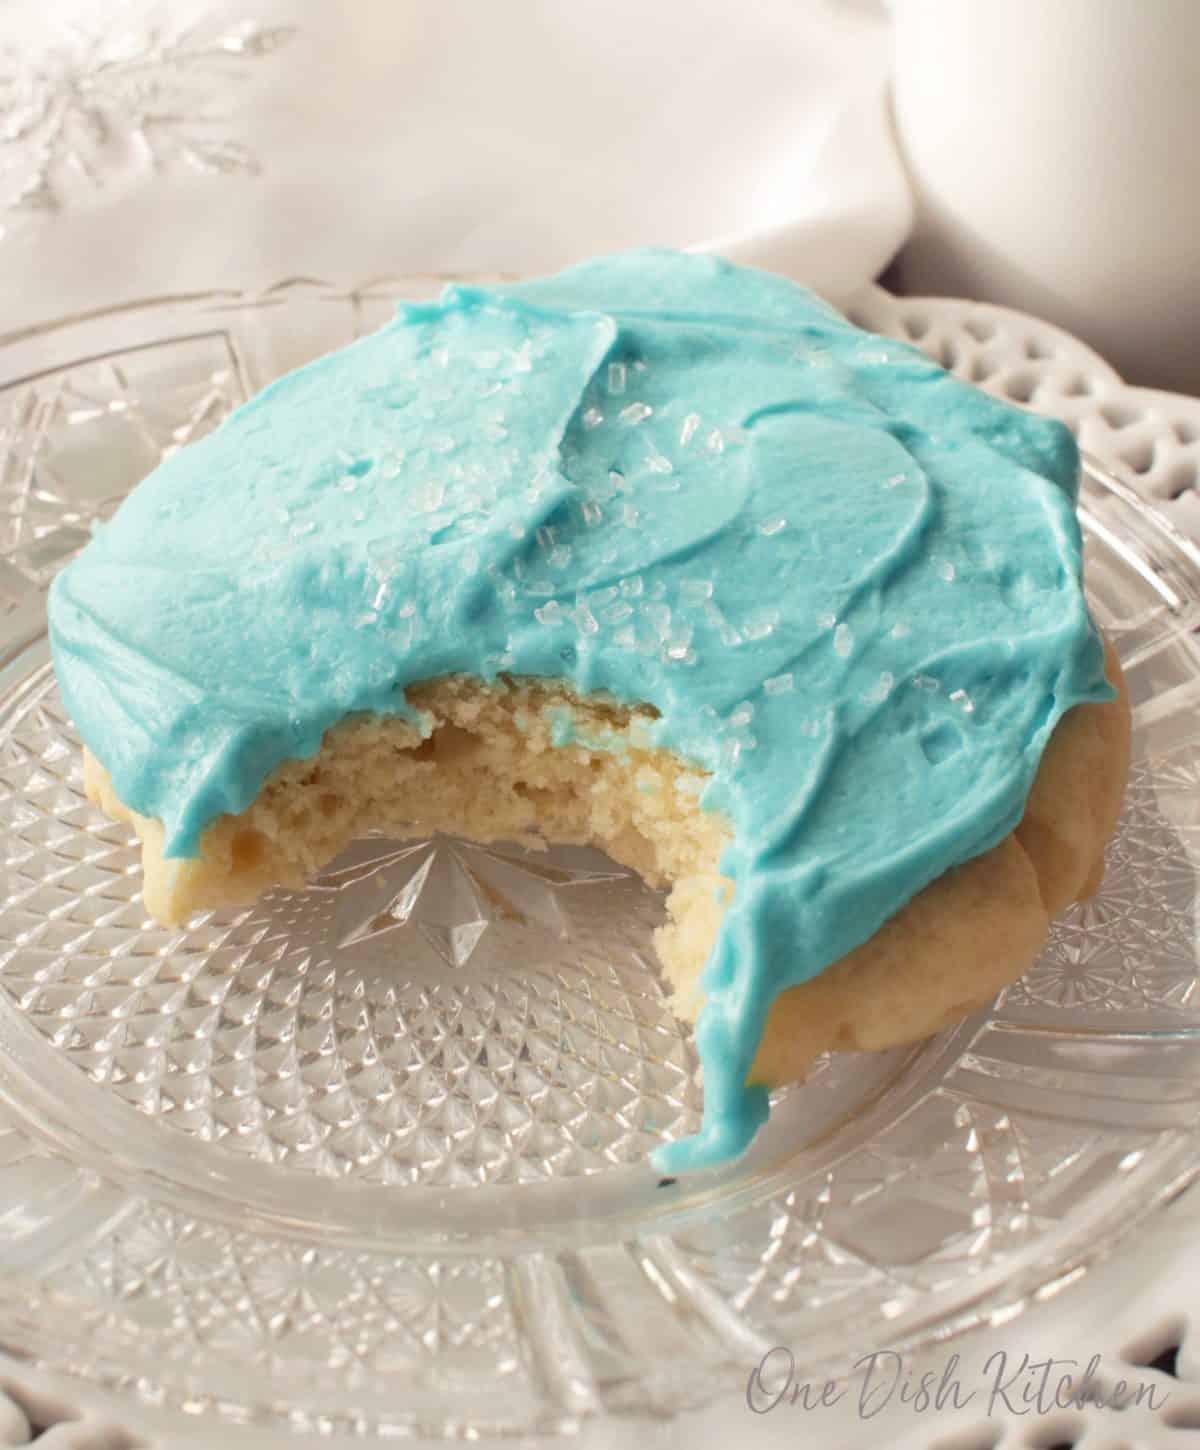 A bite missing from a blue frosted sugar cookie with white crystal sprinkles on a small plate